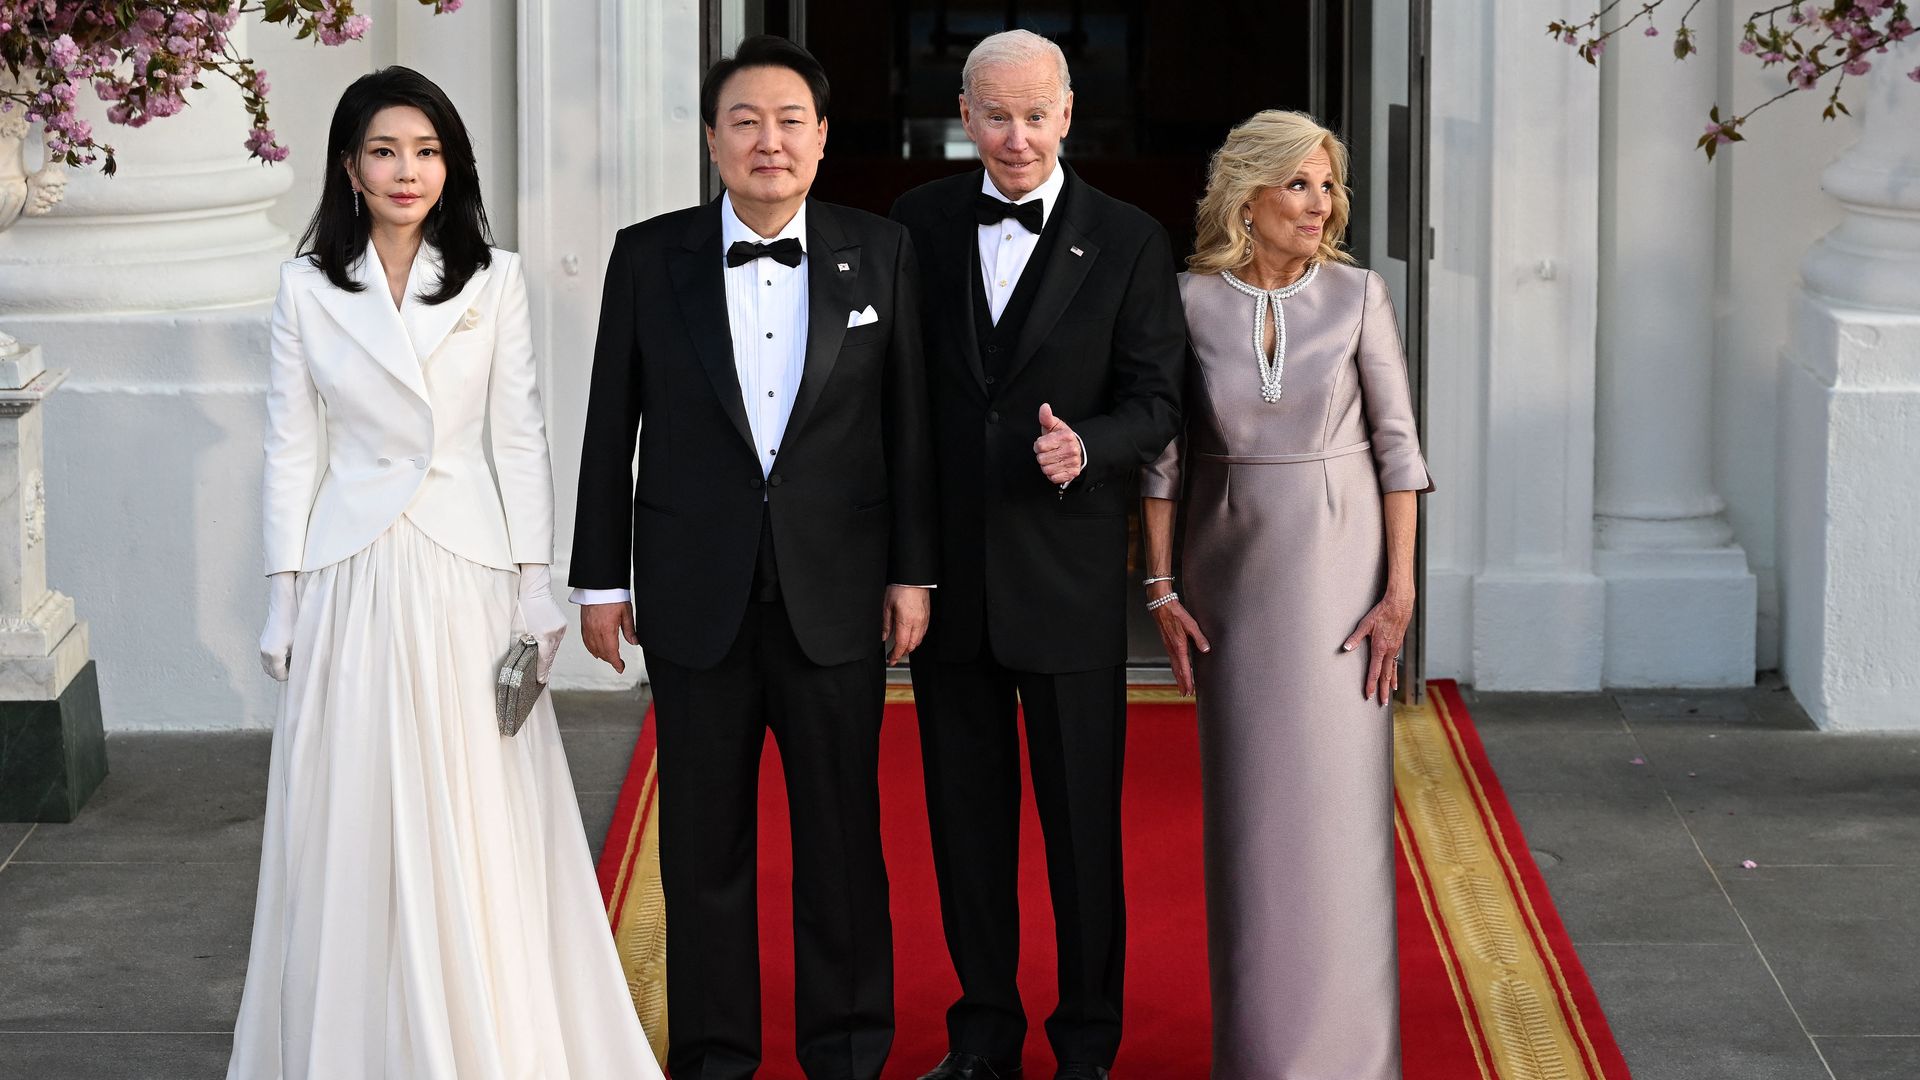 South Korean President Yoon Suk Yeol and his wife, Kim Keon Hee, pose with President Biden first lady Jill Biden before a  State Dinner at the White House on April 26, 2023.